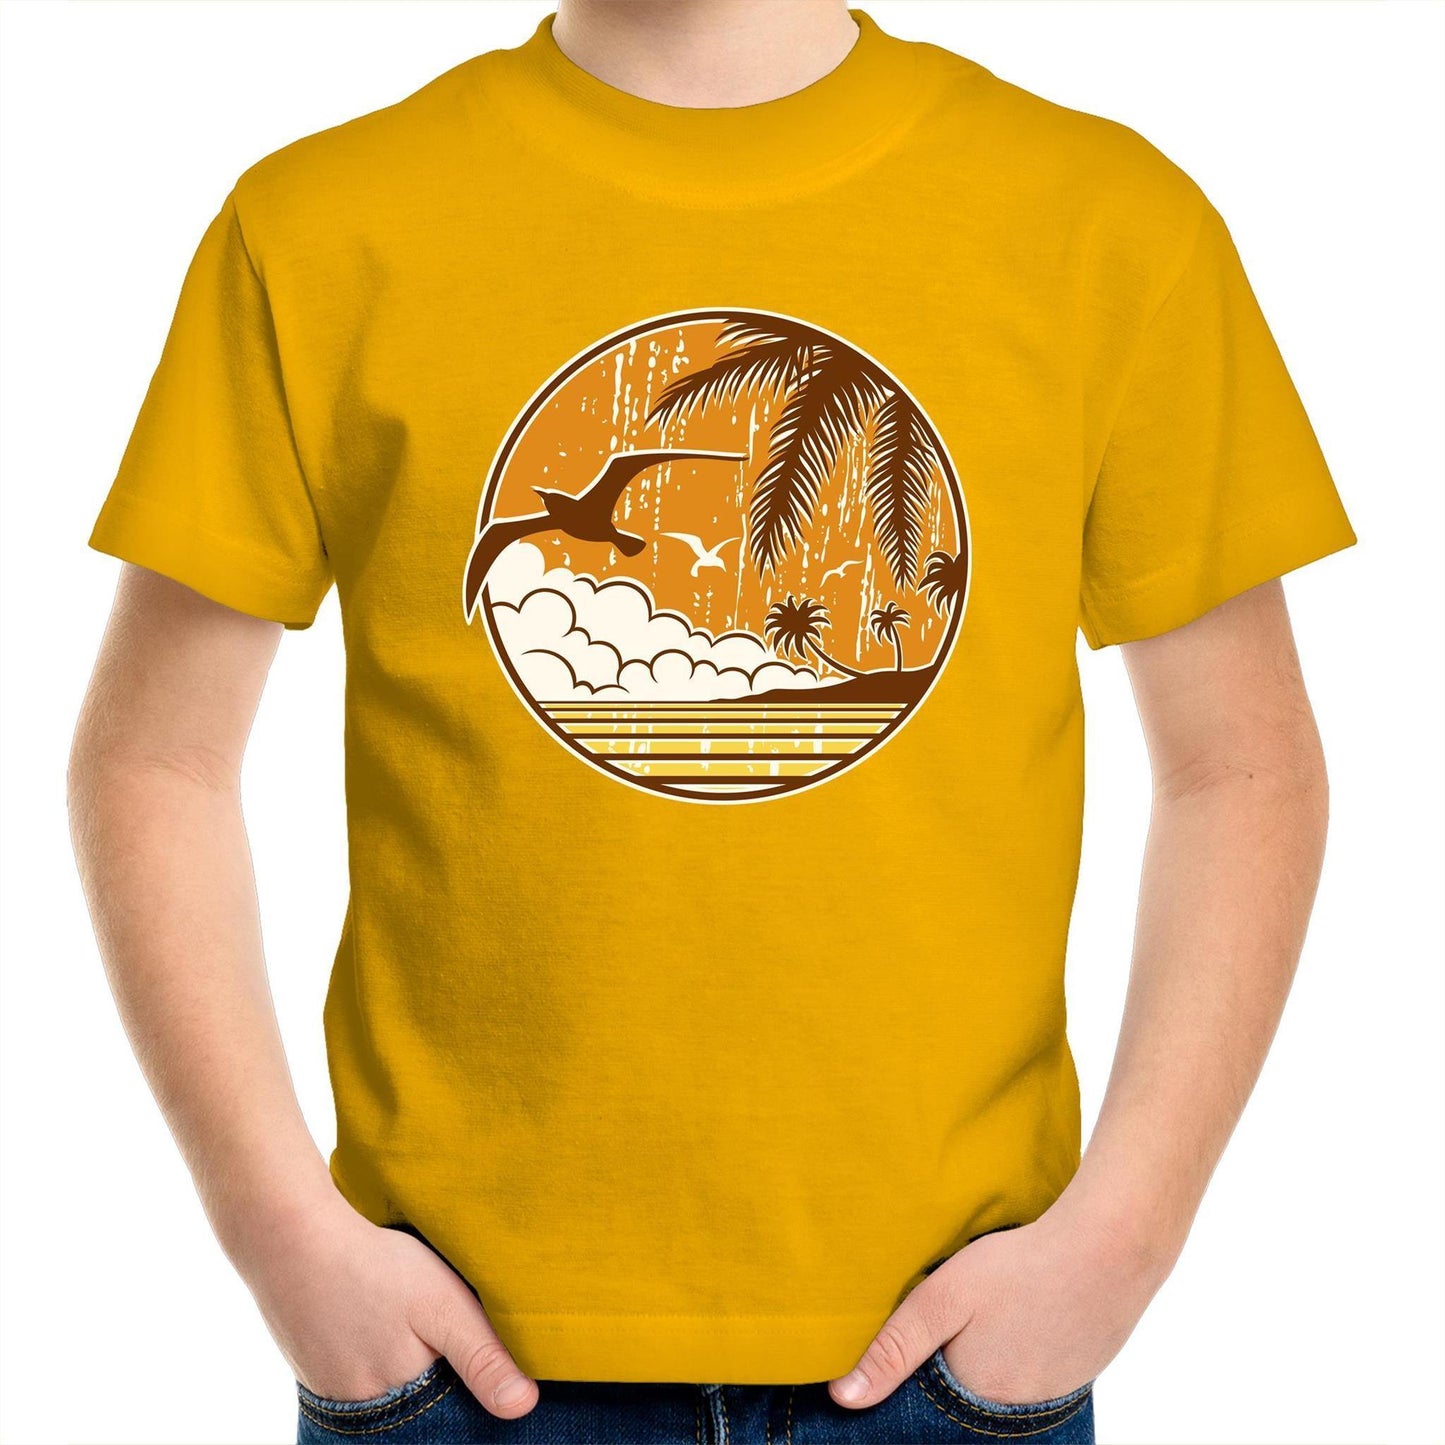 Tropical Days - Kids Youth Crew T-Shirt Gold Kids Youth T-shirt Retro Summer